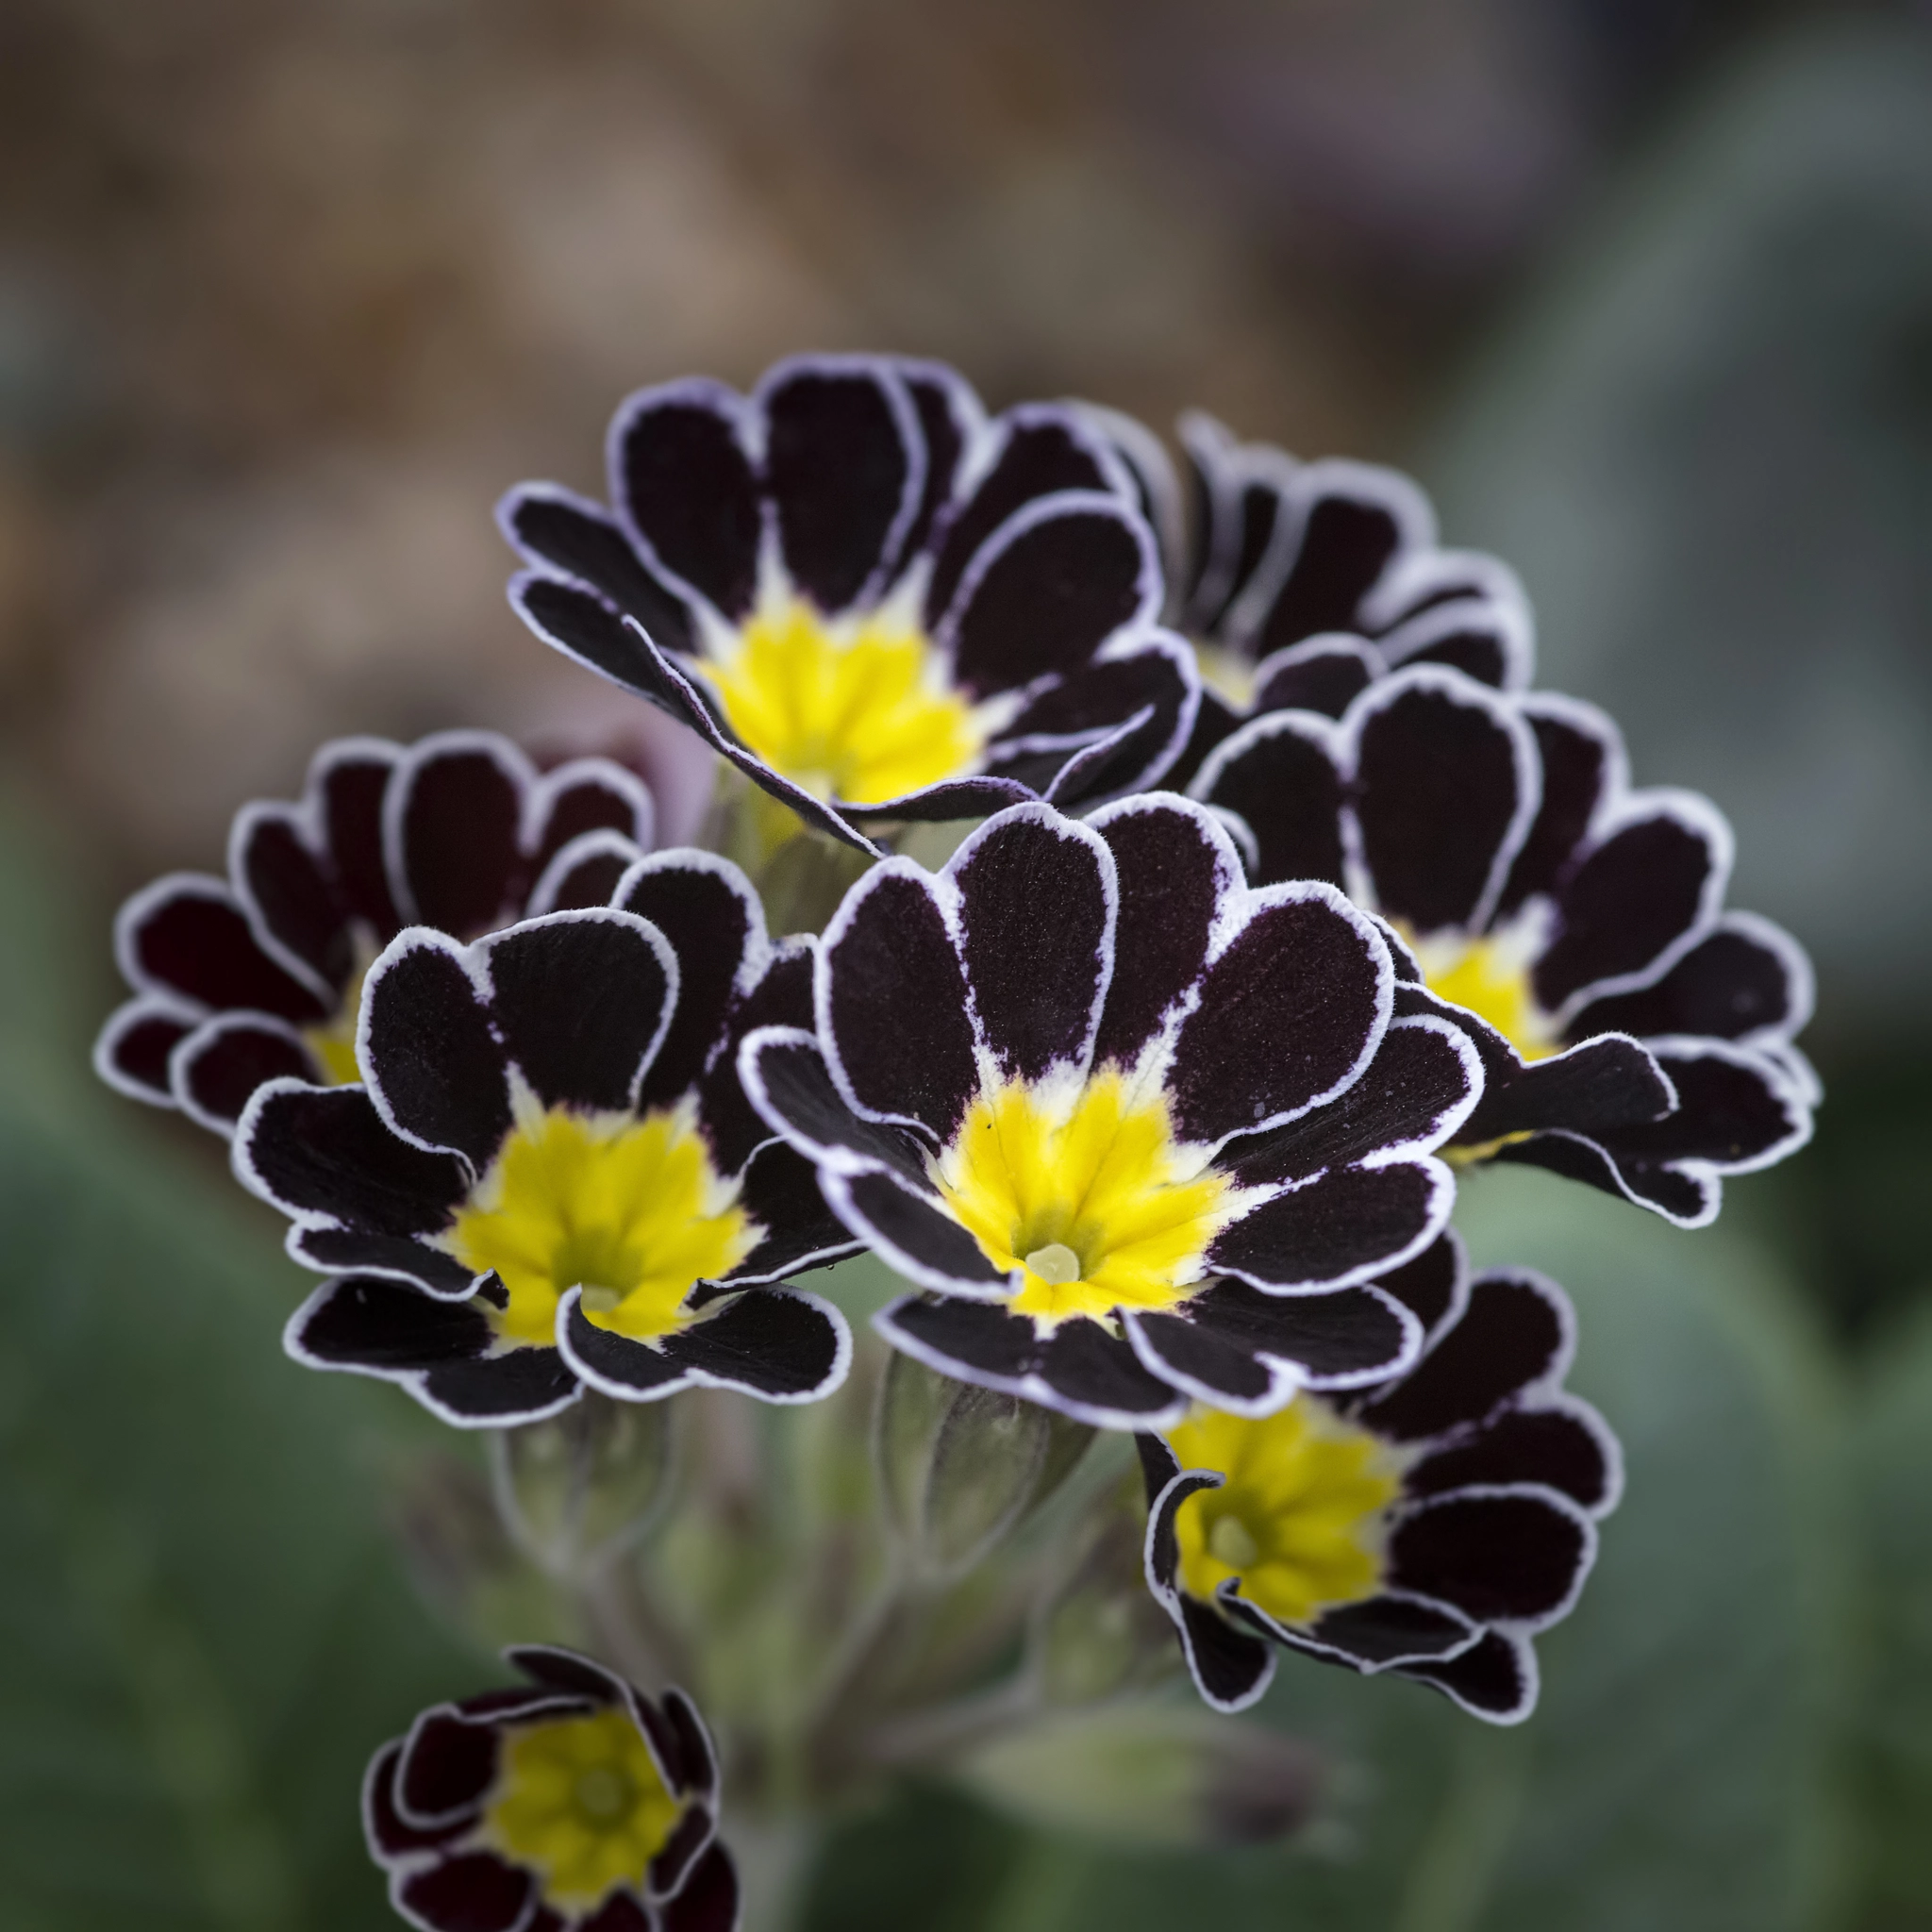 Nikon D800 + Sigma 105mm F2.8 EX DG Macro sample photo. Stunning polyanthus silver lace primula flower in full bloom photography